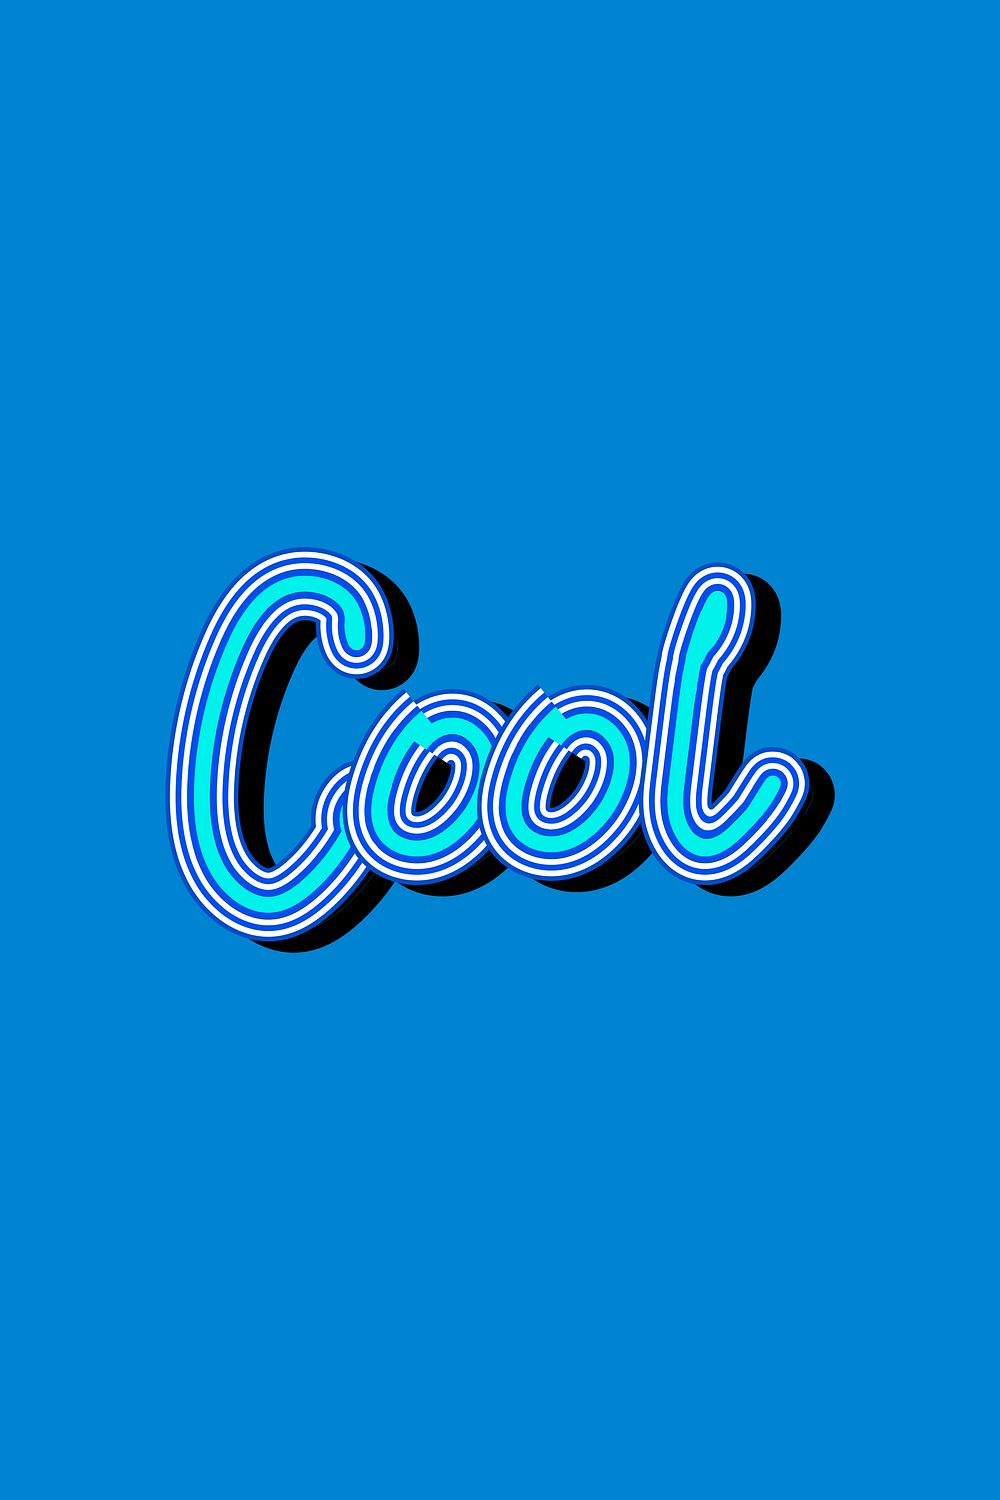 Cool retro psd blue background | Free PSD - rawpixel